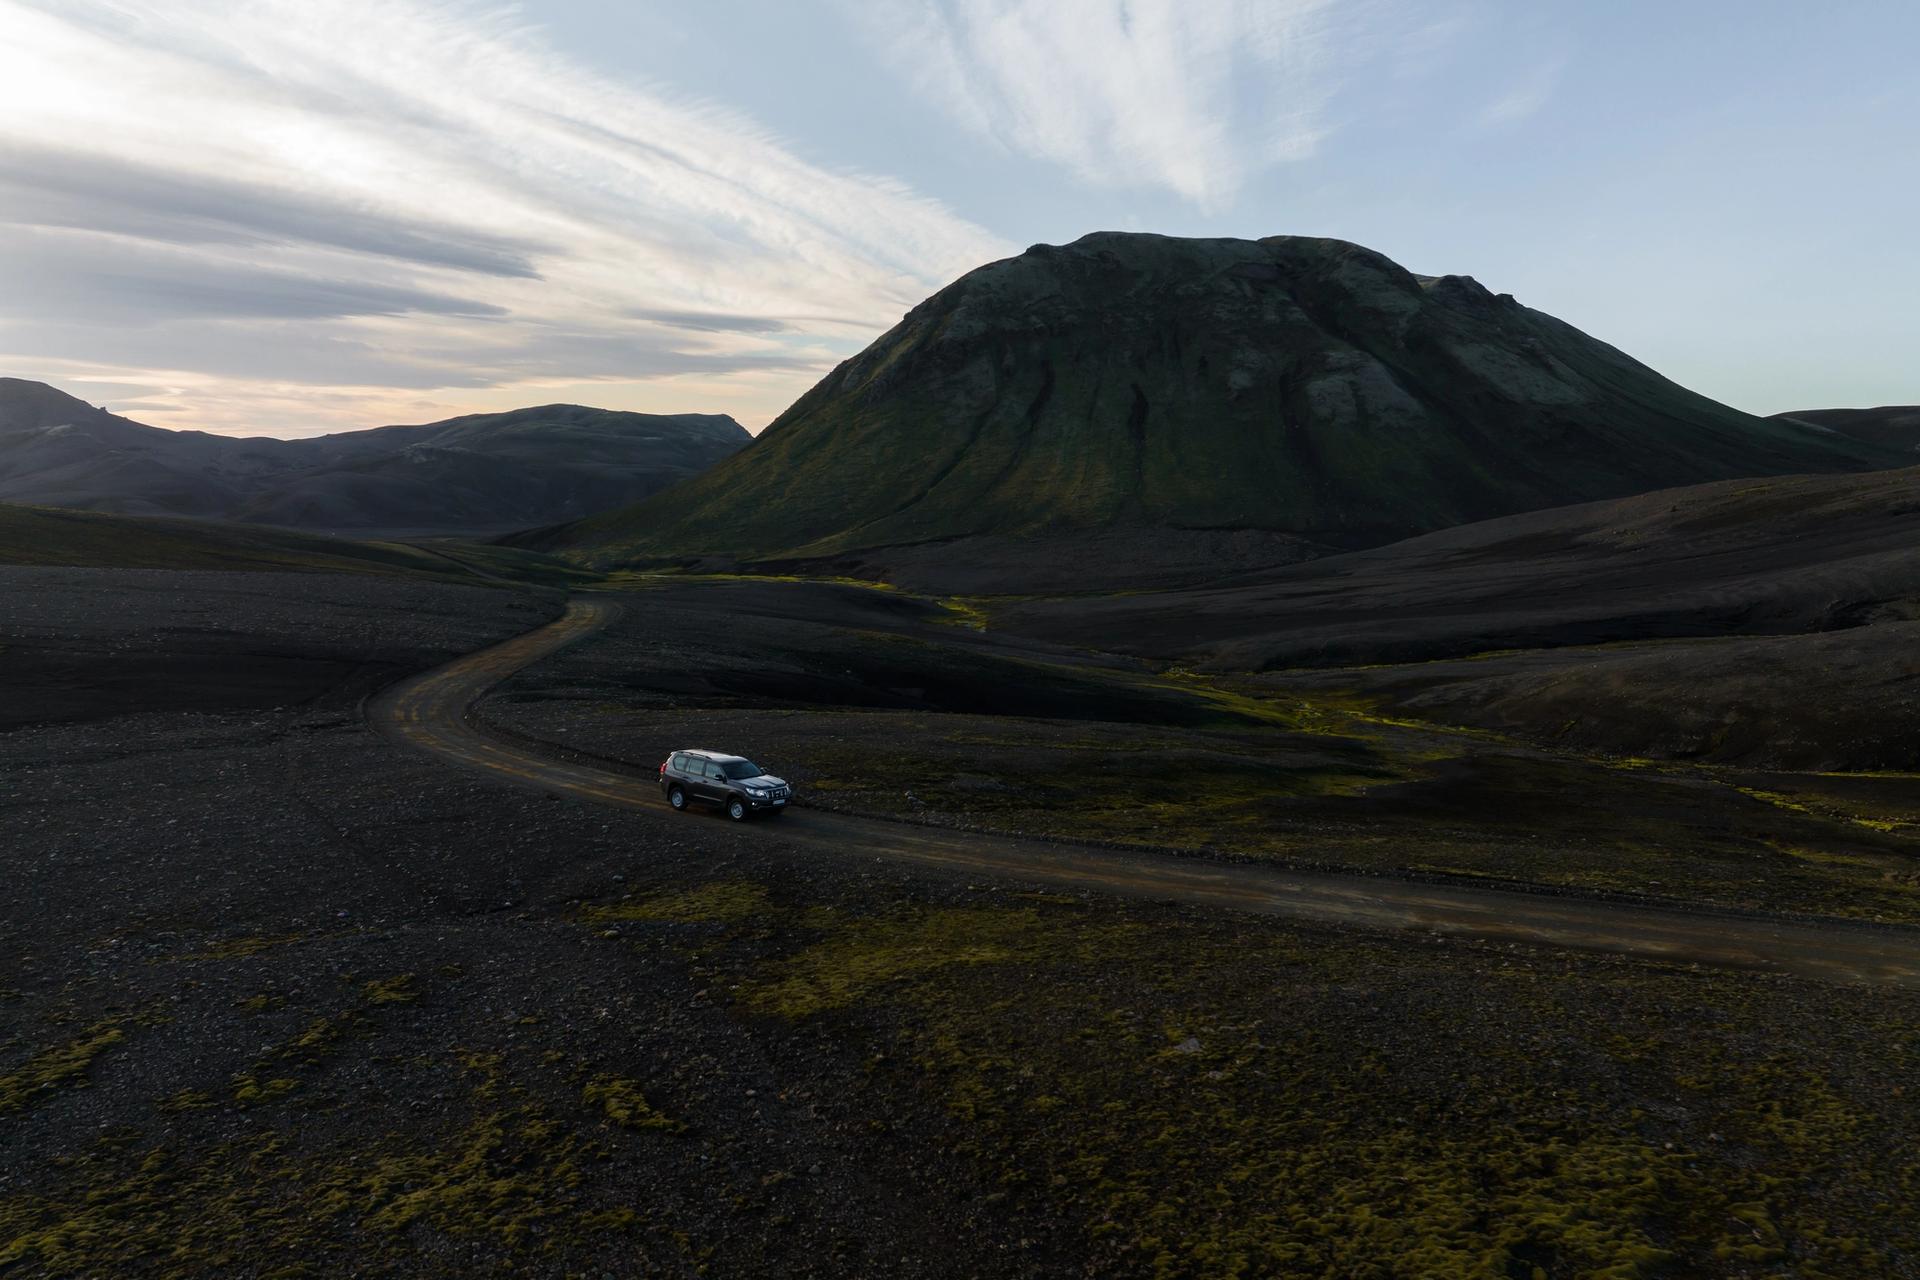 A robust Toyota Land Cruiser navigating the off-roads in Iceland's rugged terrain